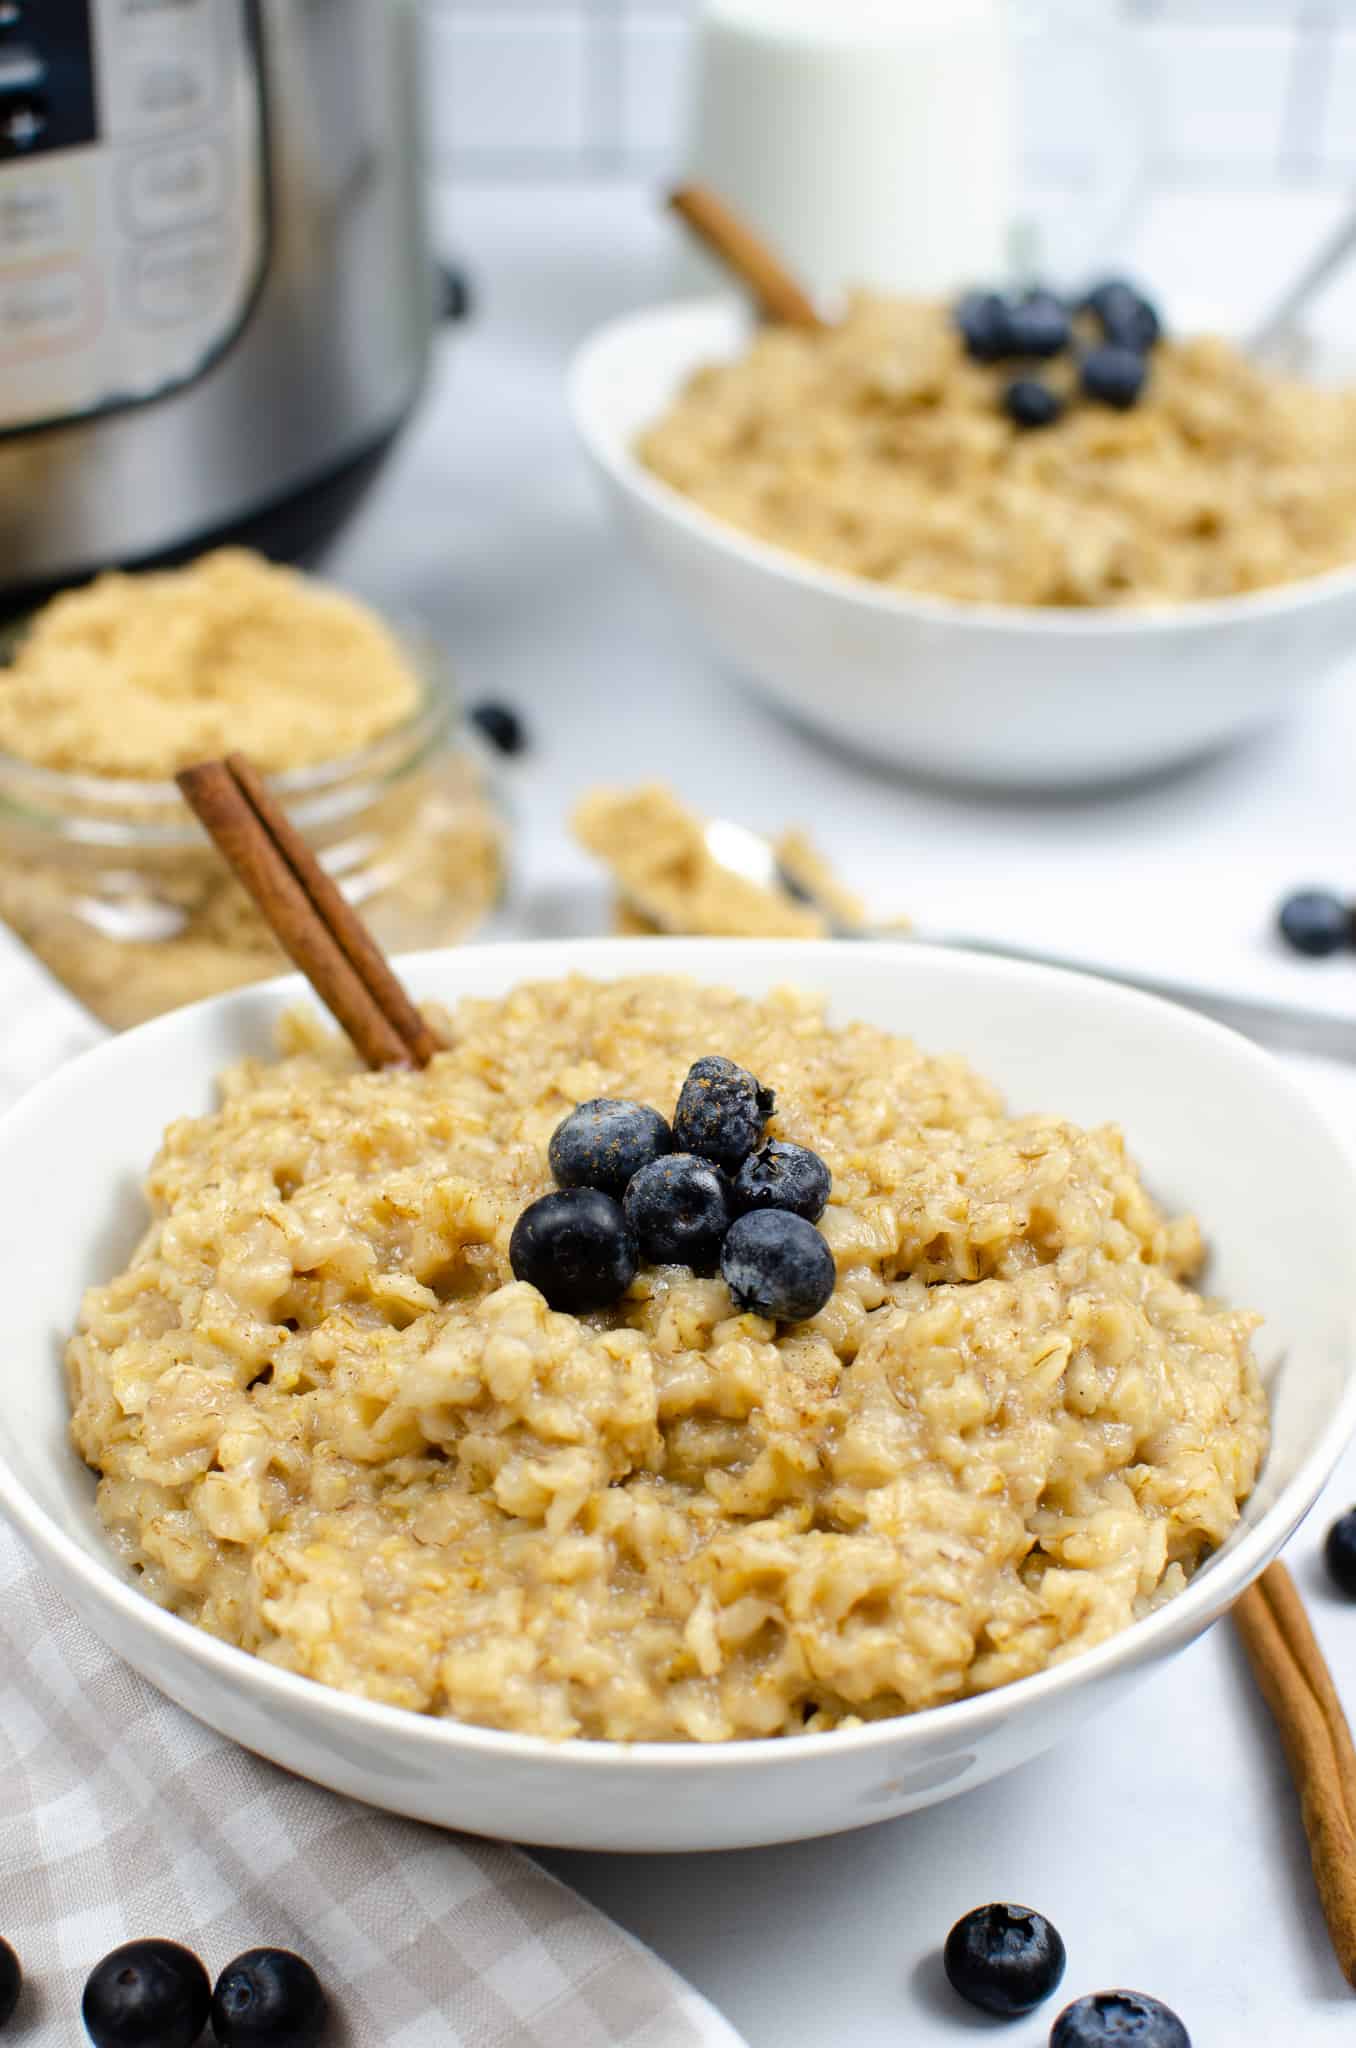 Instant Pot Maple and Brown sugar Oatmeal in a white bowl with a cinnamon stick and blueberries